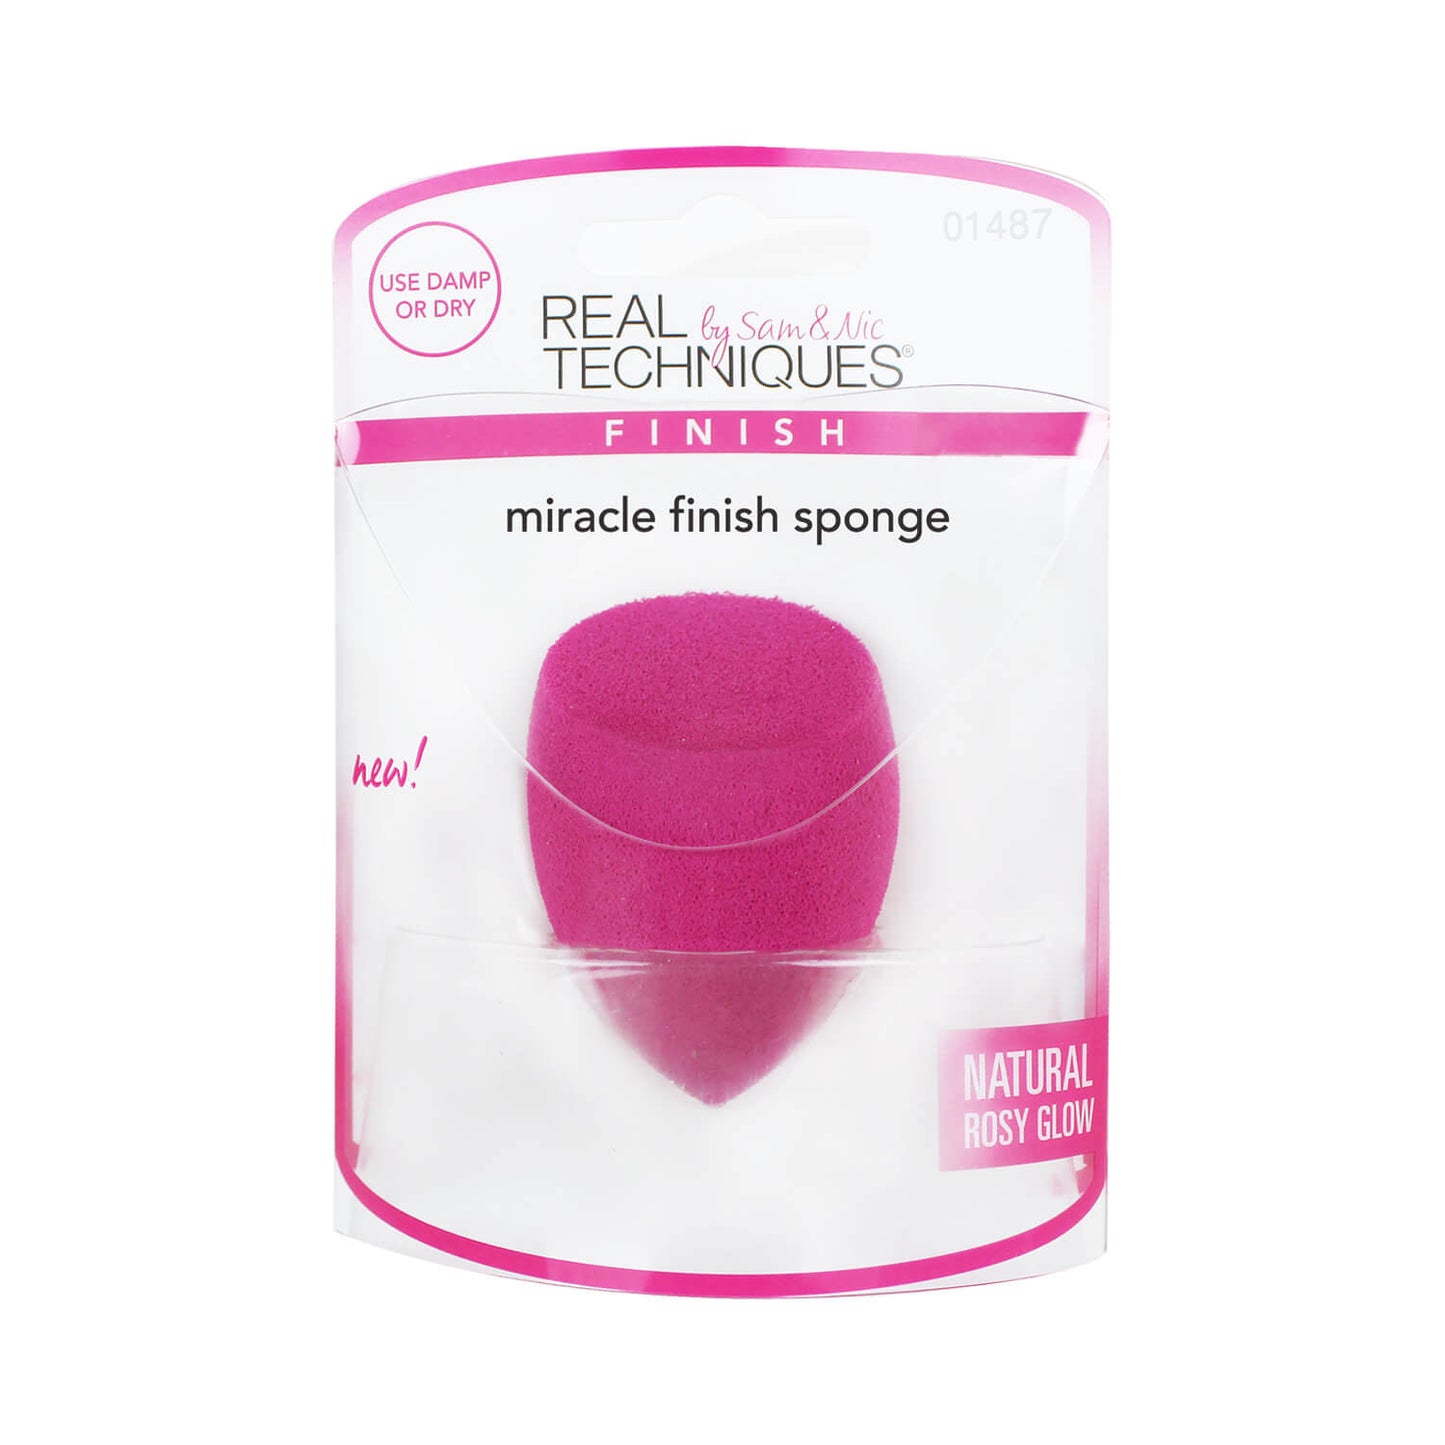 Real Techniques Miracle Finish Sponge Package